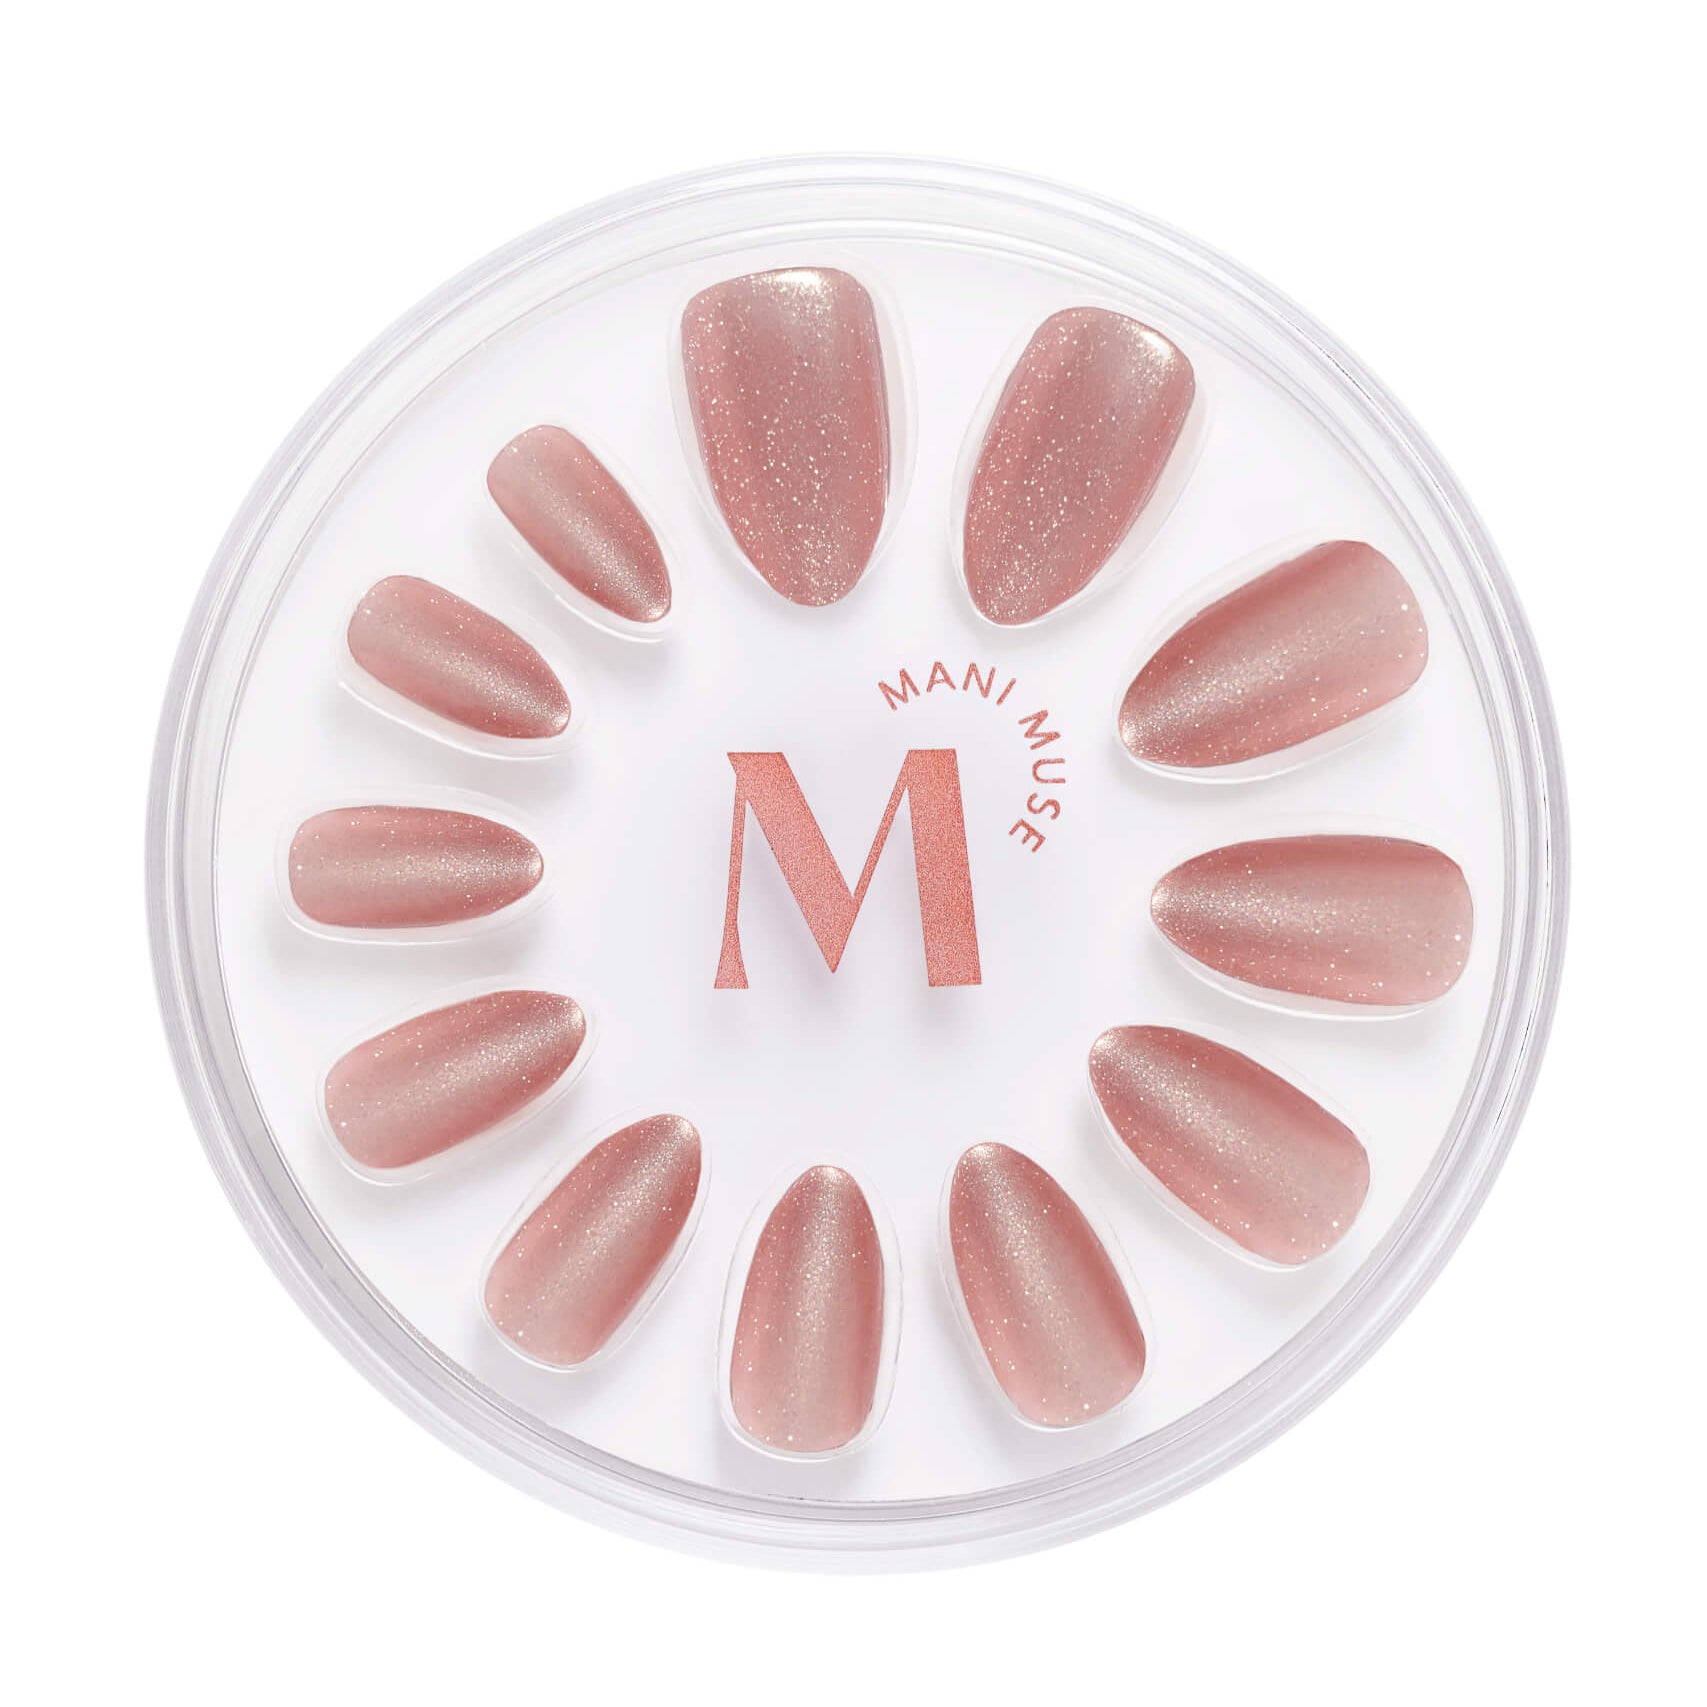 Mani Muse Pinky Blinders Press-on Nails - Almond